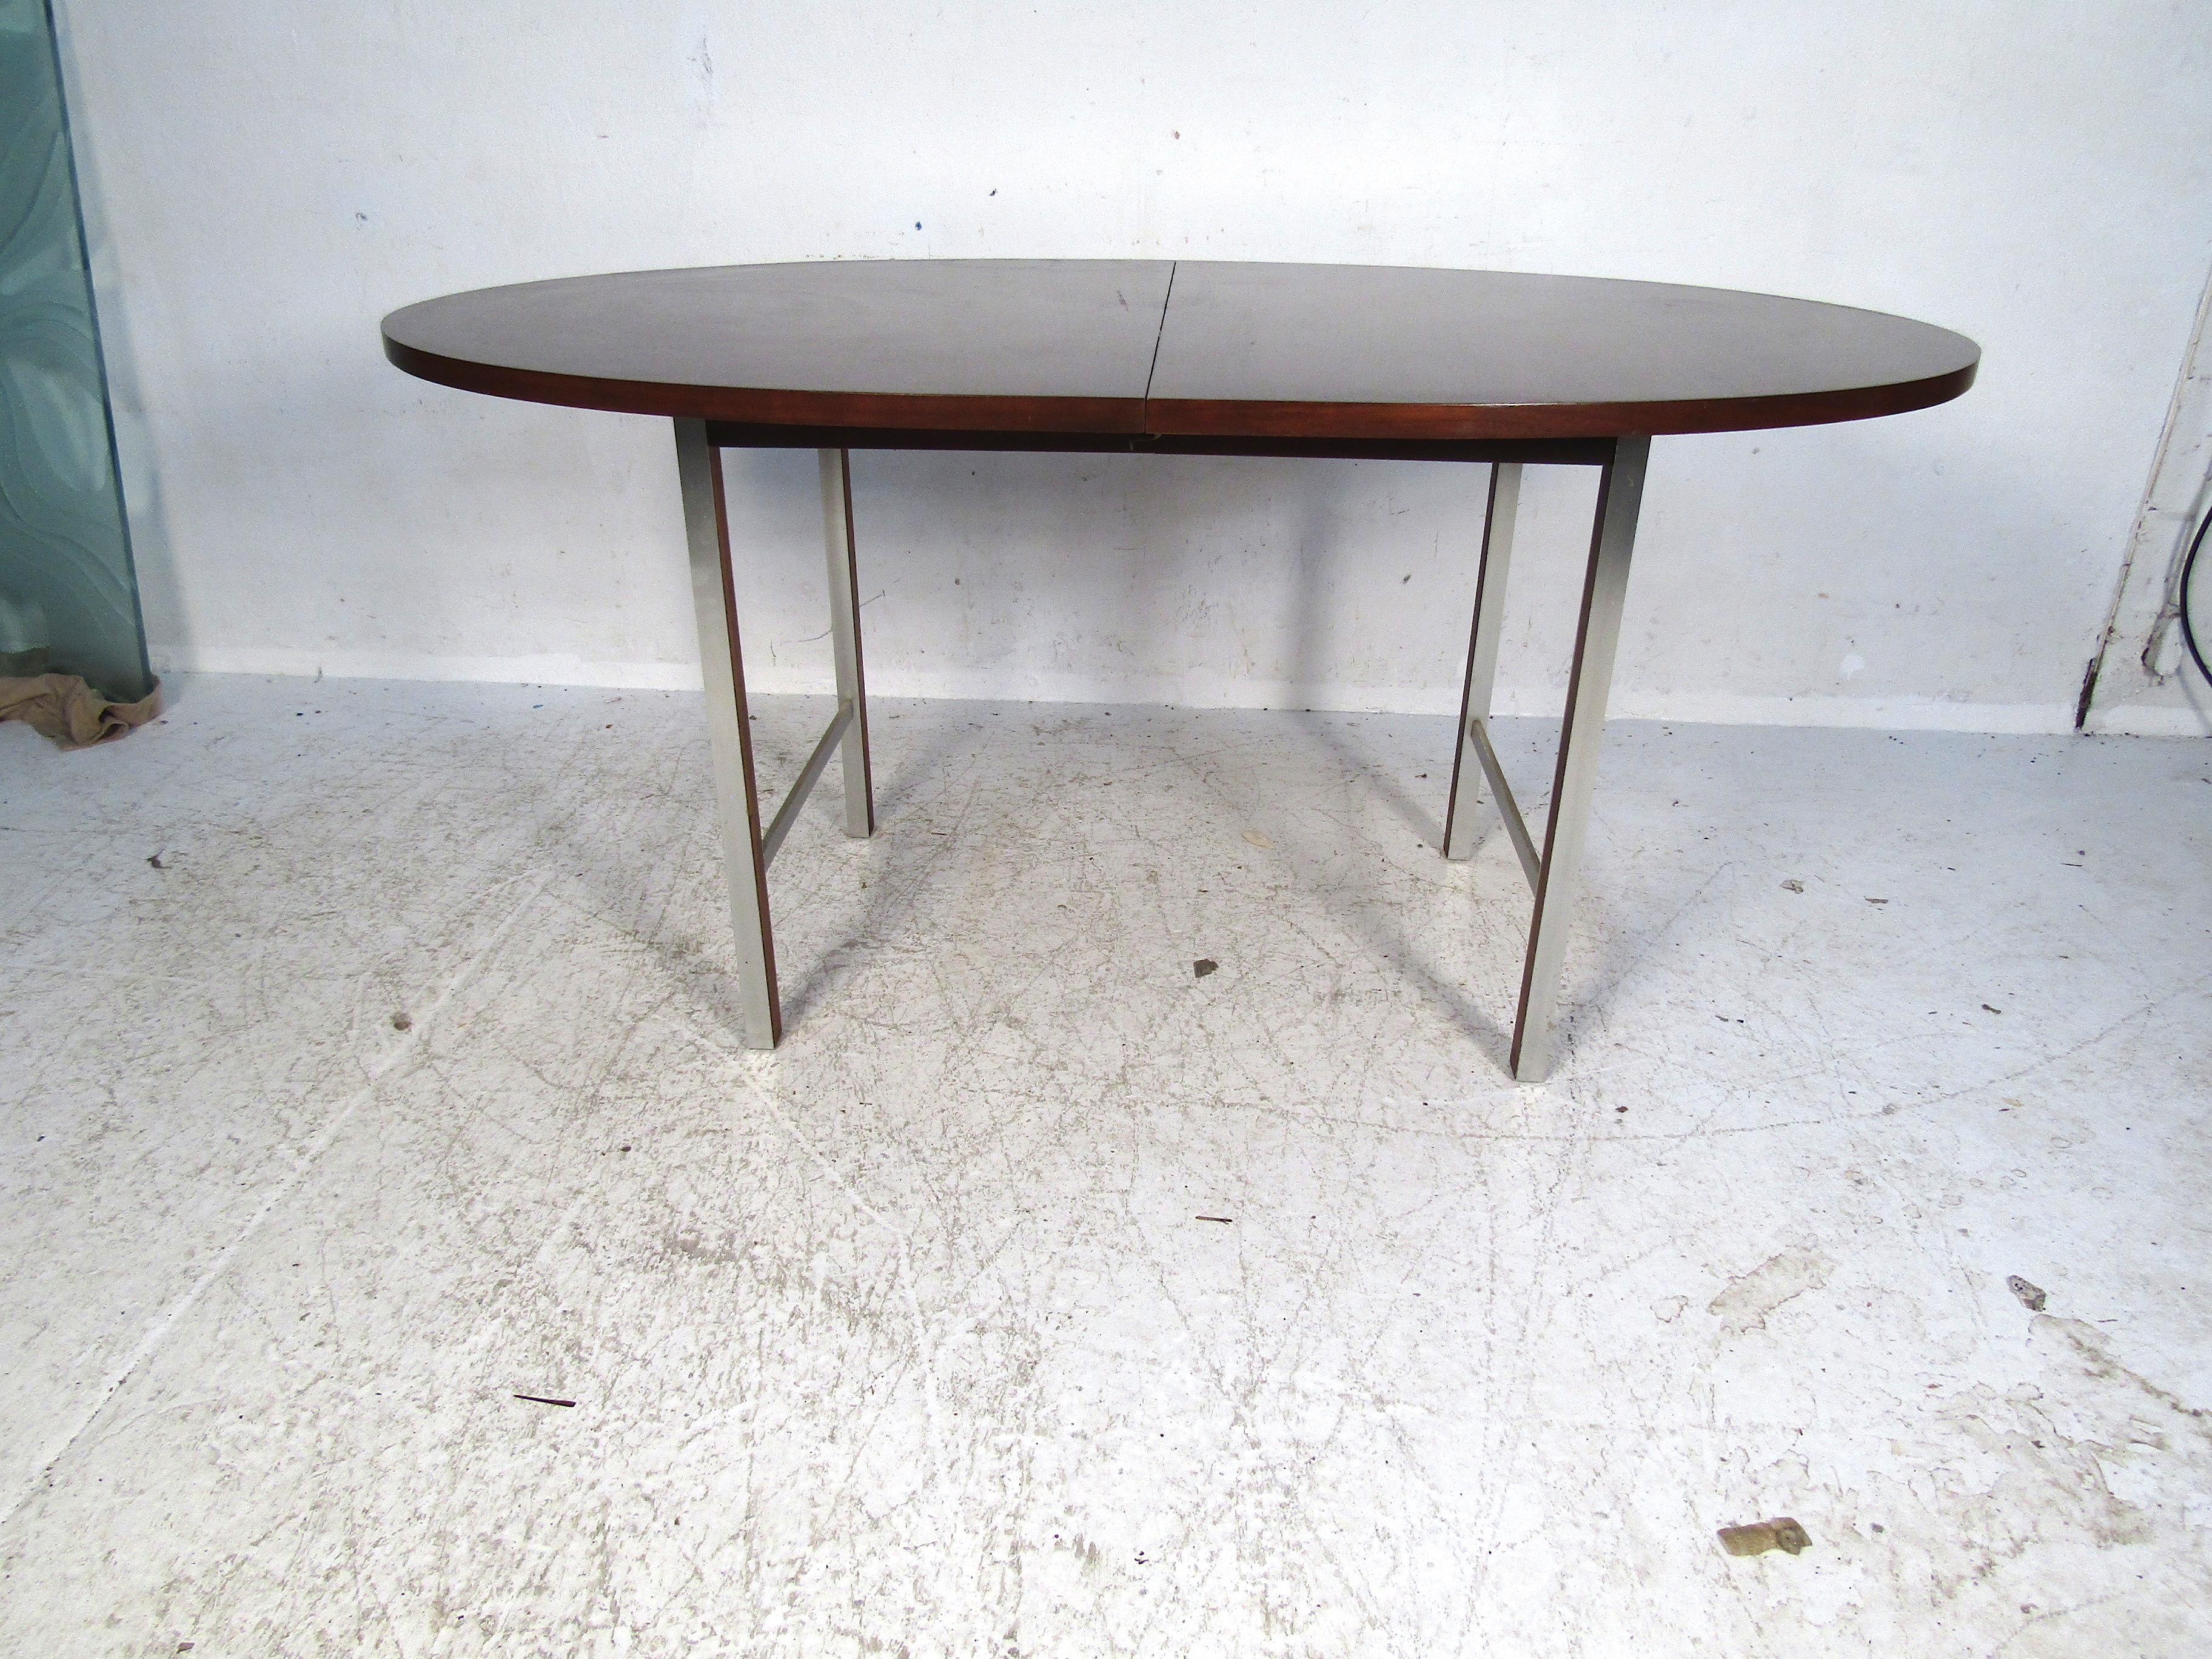 This midcentury dining table is simplistic in design, but still quite elegant. It features a deep color with beautiful grain patterns. The legs feature subtle chrome accents with walnut inlays. Perfect for a large kitchen or smaller dining room.